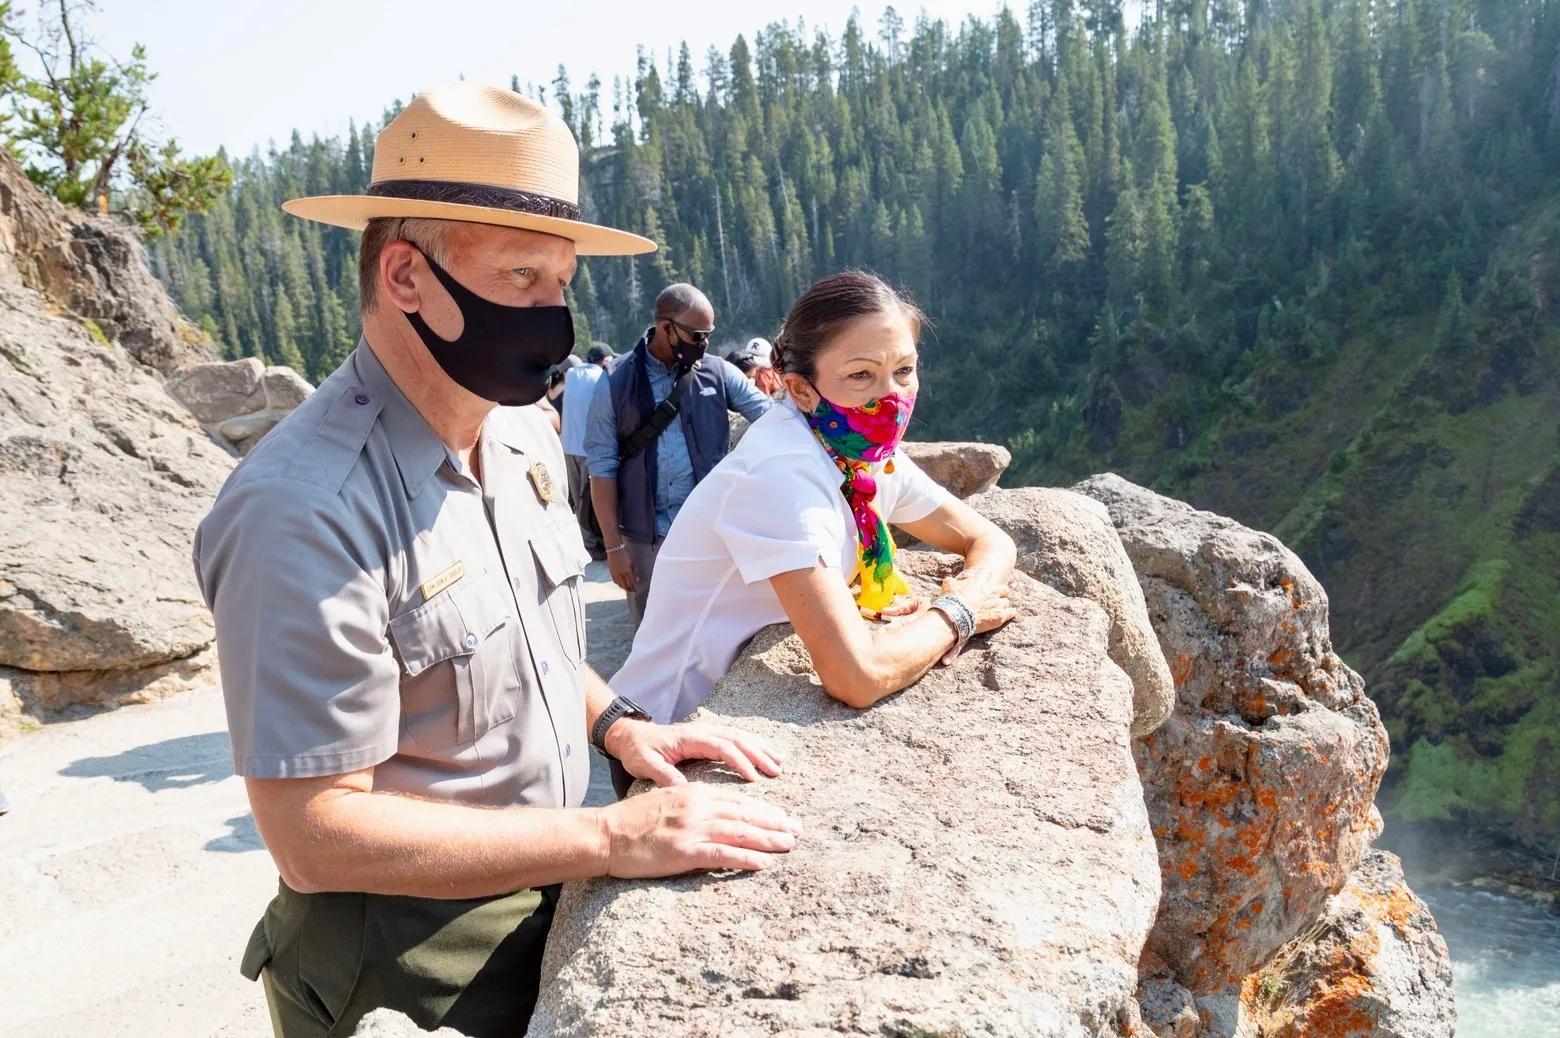 Sholly gives U.S. Interior Secretary Deb Haaland a tour of Yellowstone in summer 2021, the busiest on record. Photo by Jacob W. Frank